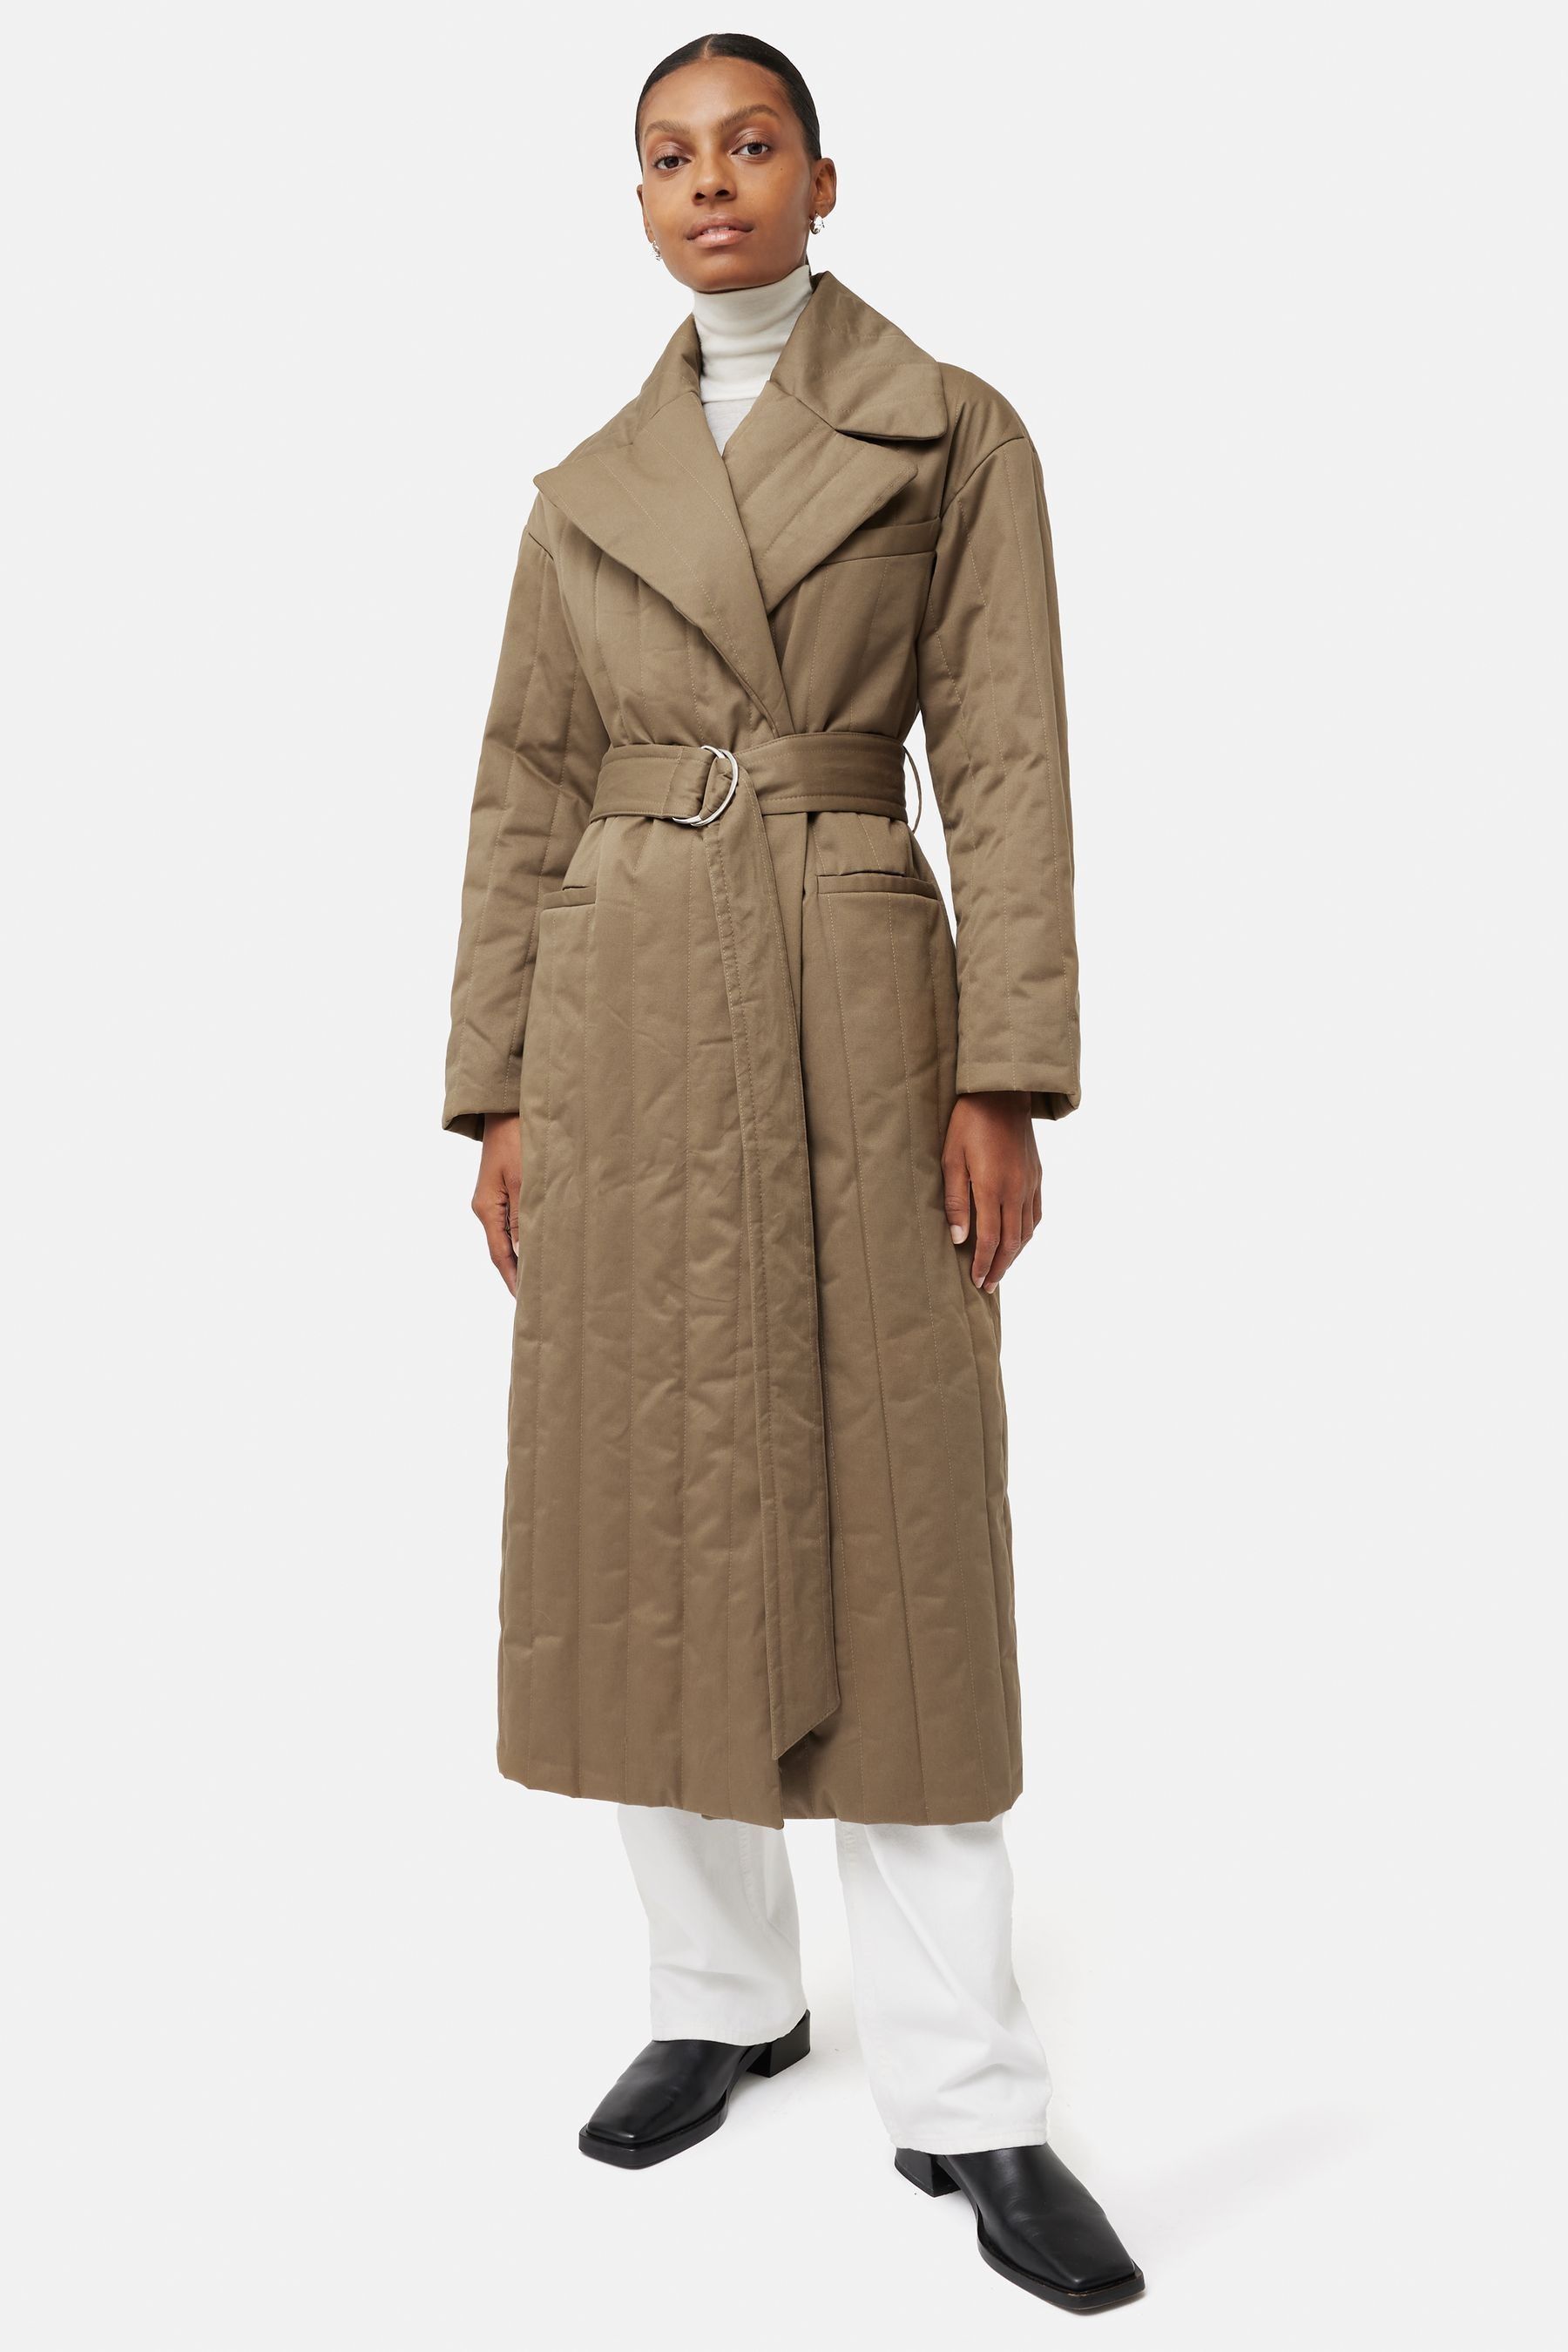 Buy Jigsaw Khaki Freya Quilted Trench Coat from the Next UK online shop